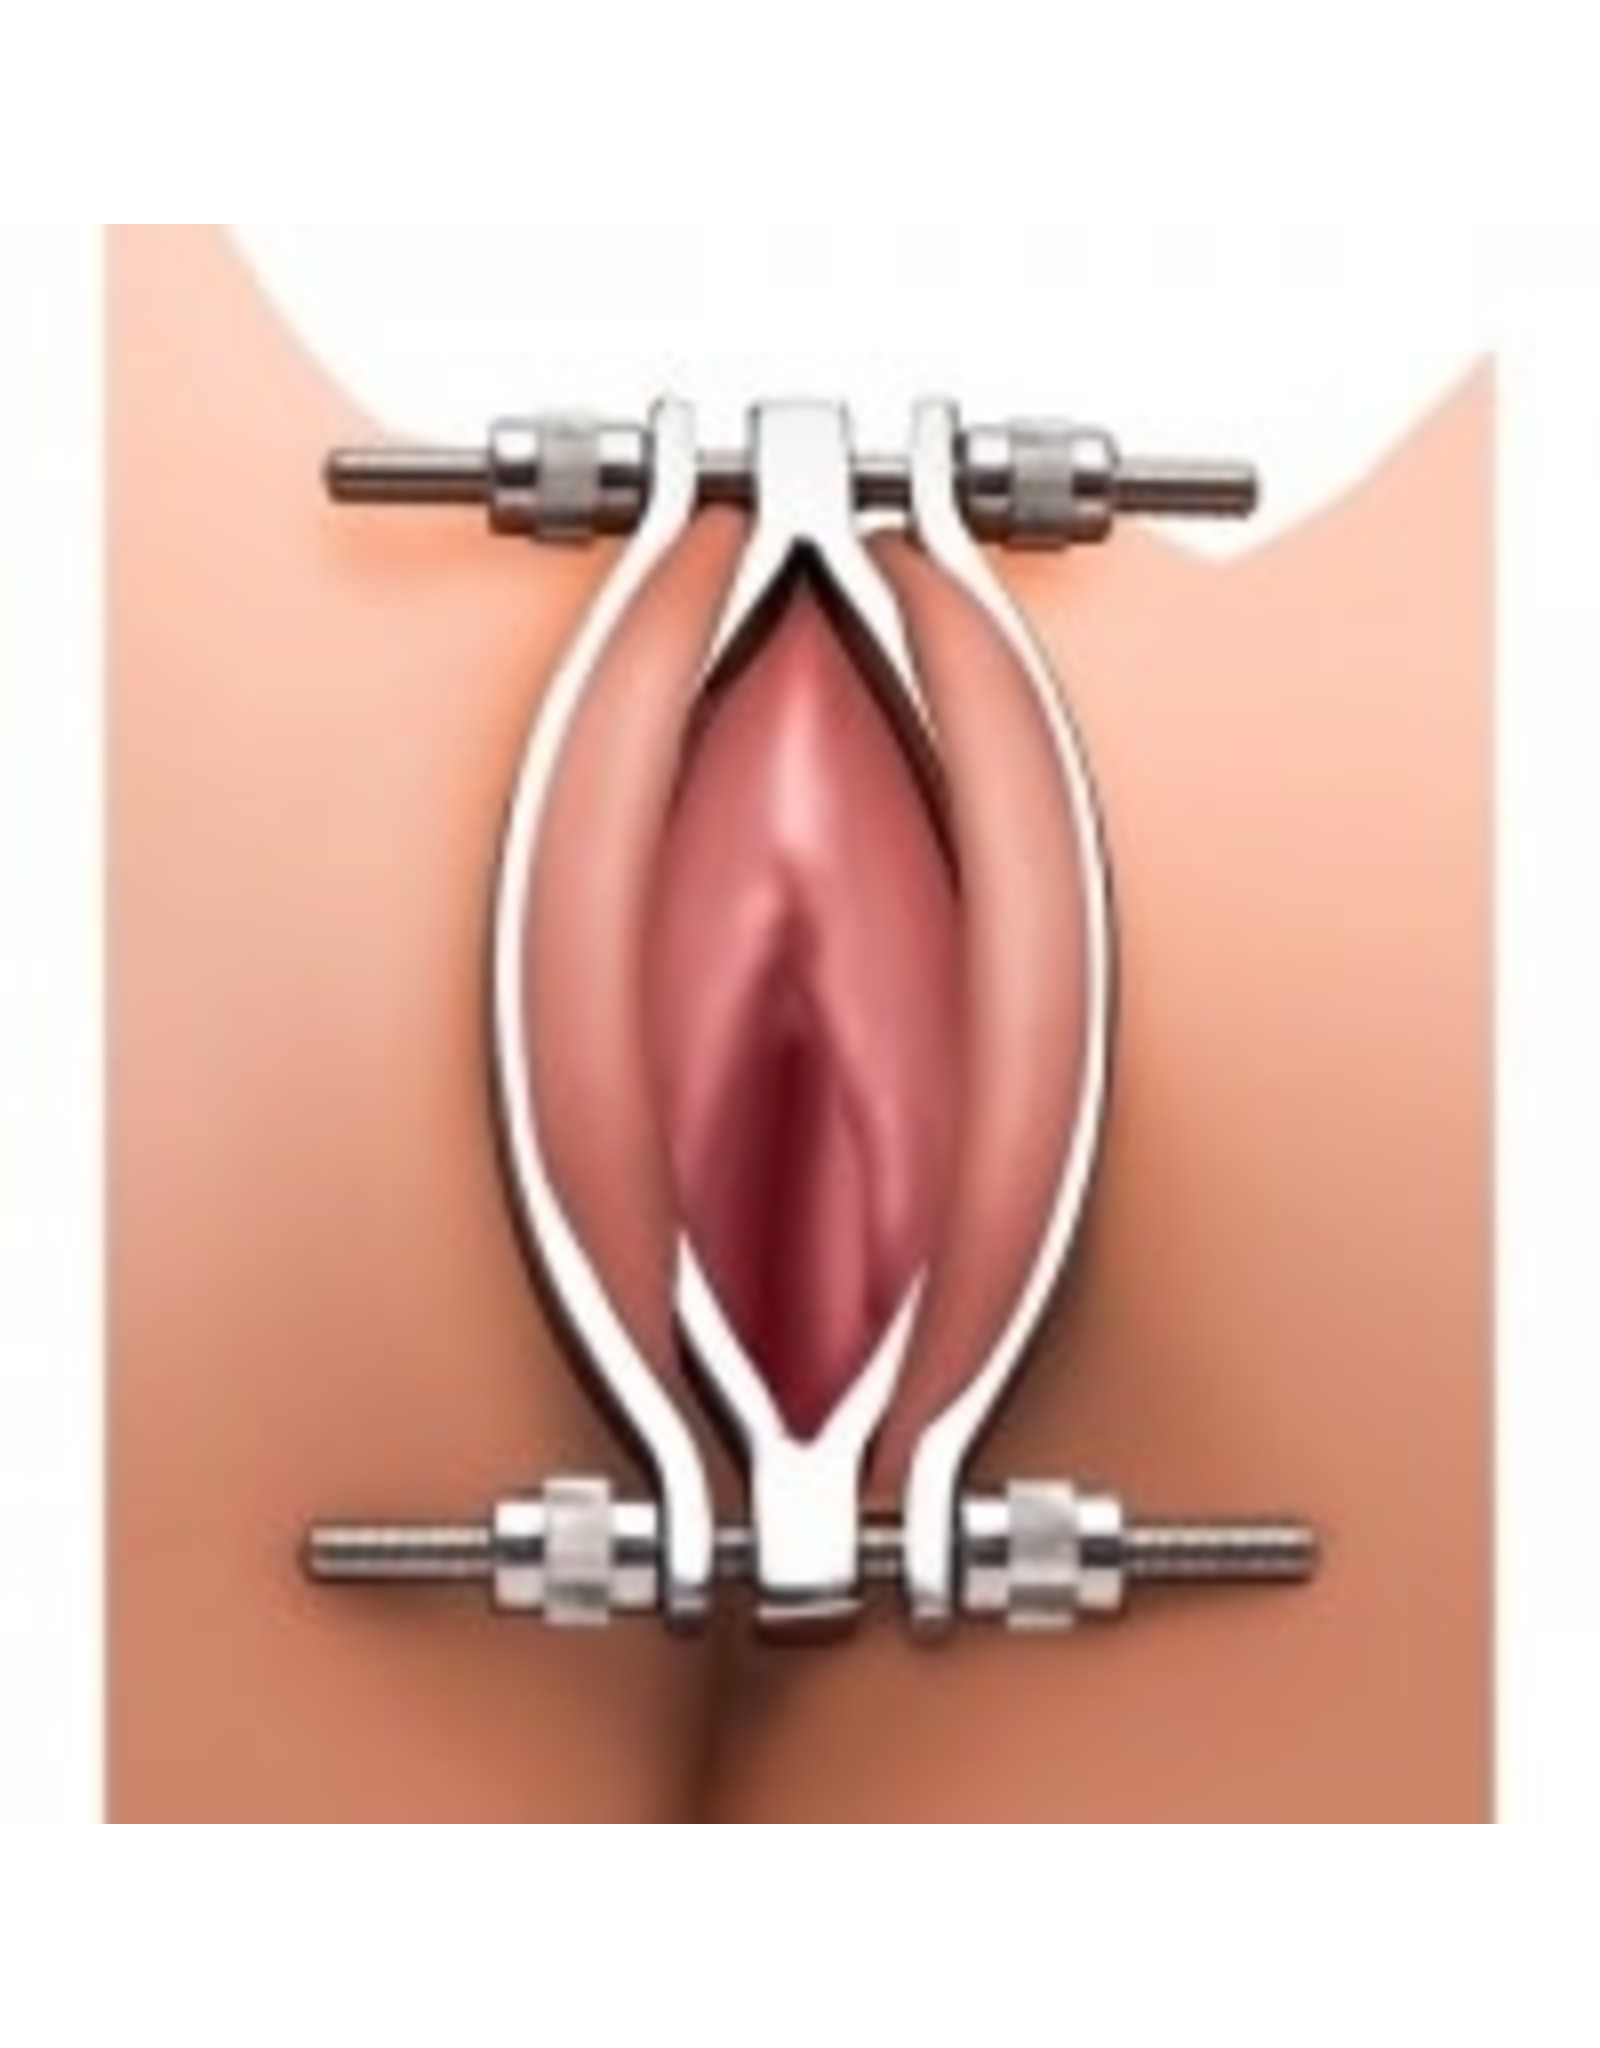 Master Series - Stainless Steel Adjustable Pussy Clamp